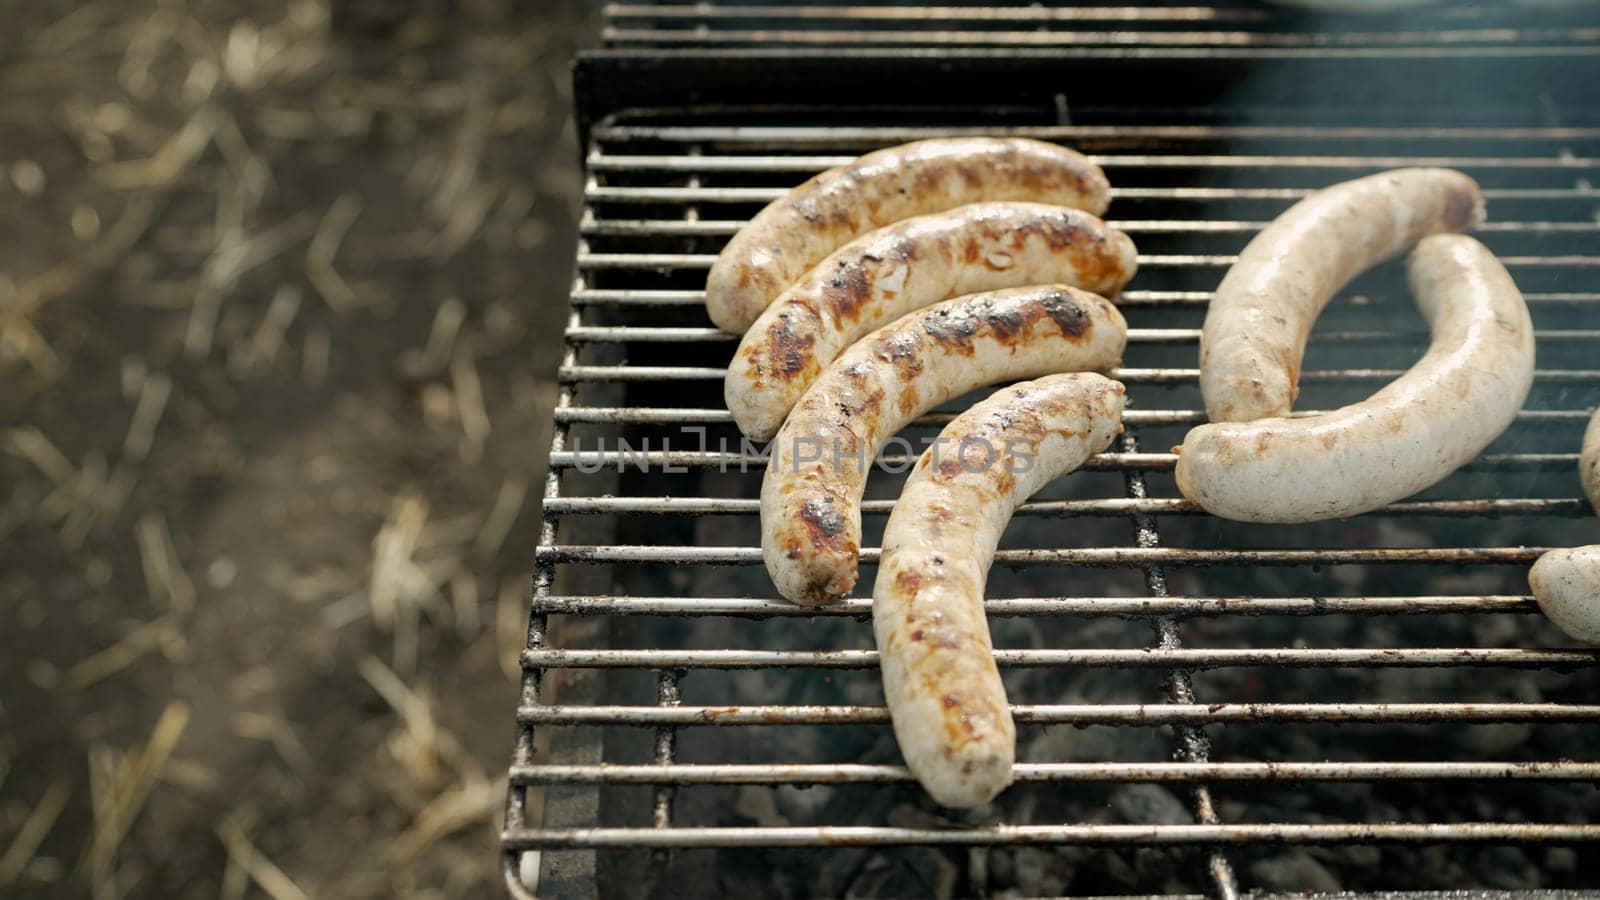 Sausages are fried on a barbecue grill. Bratwurst or Hot Dogs on Grill with Flames.